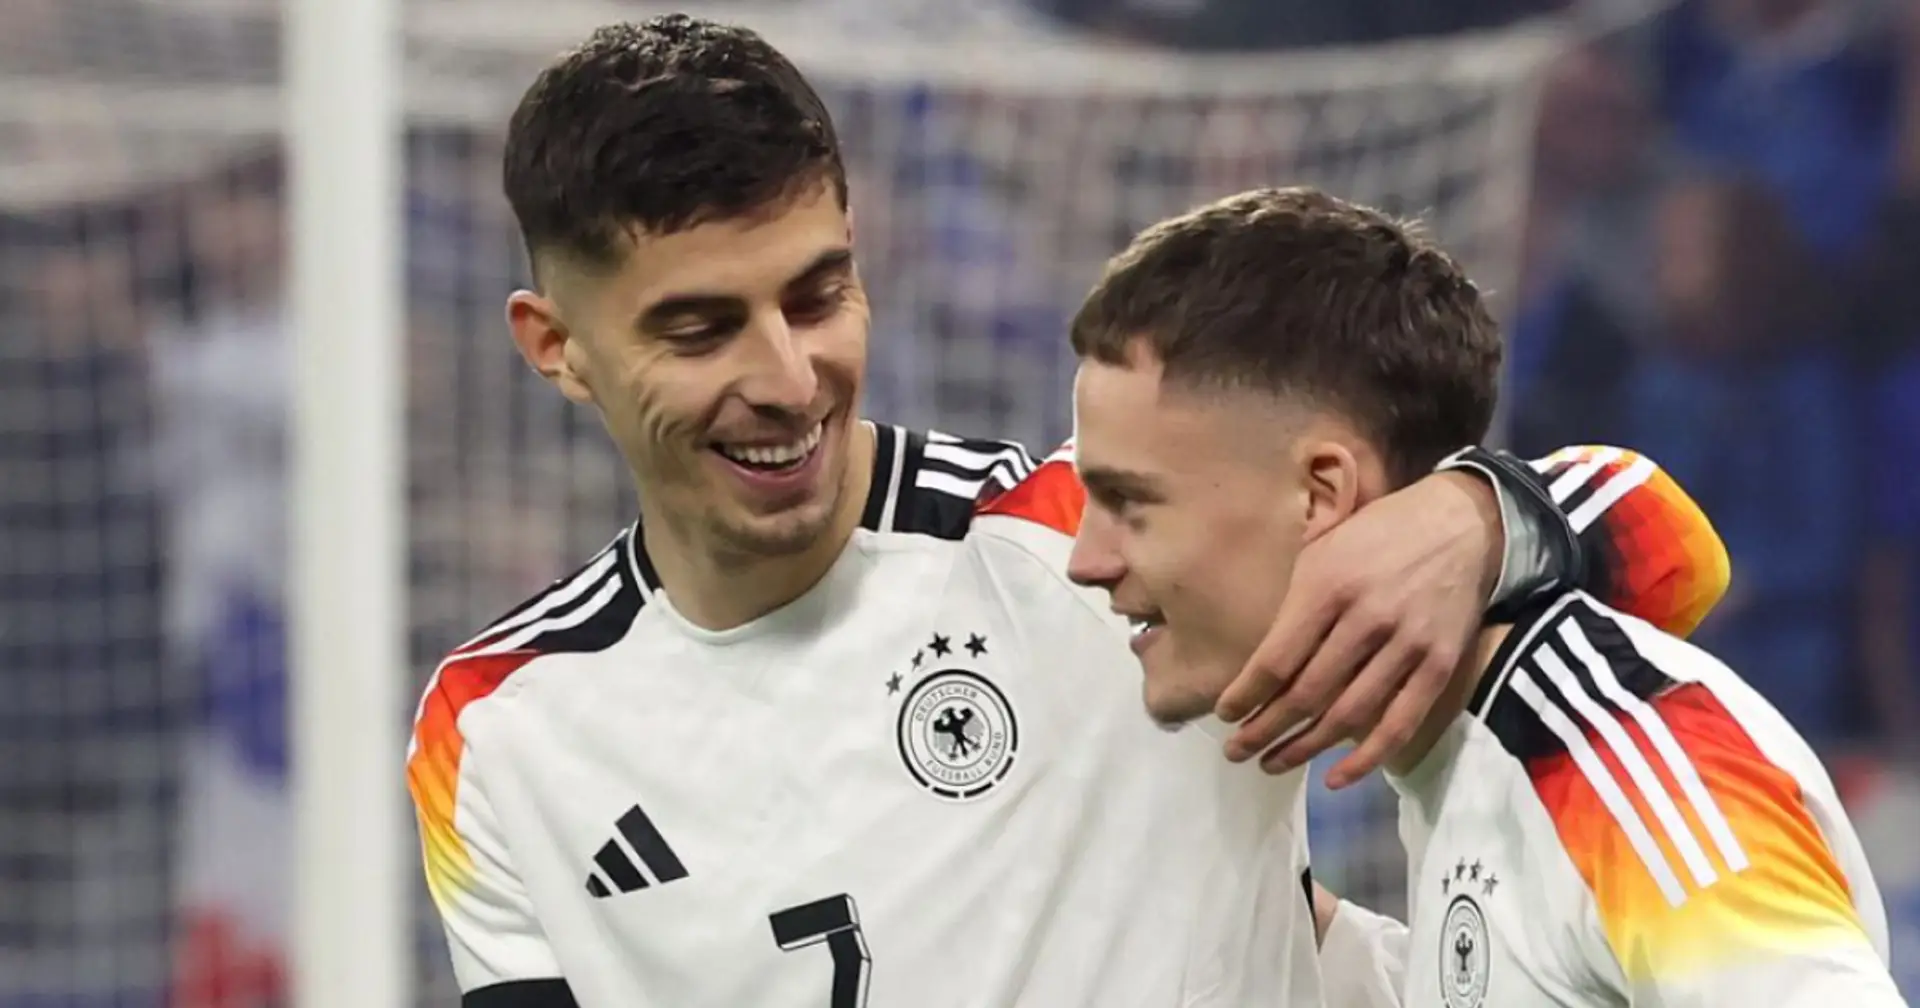 'Today was a lot of fun': Kai Havertz shows impressive performance for Germany in William Saliba's absence 